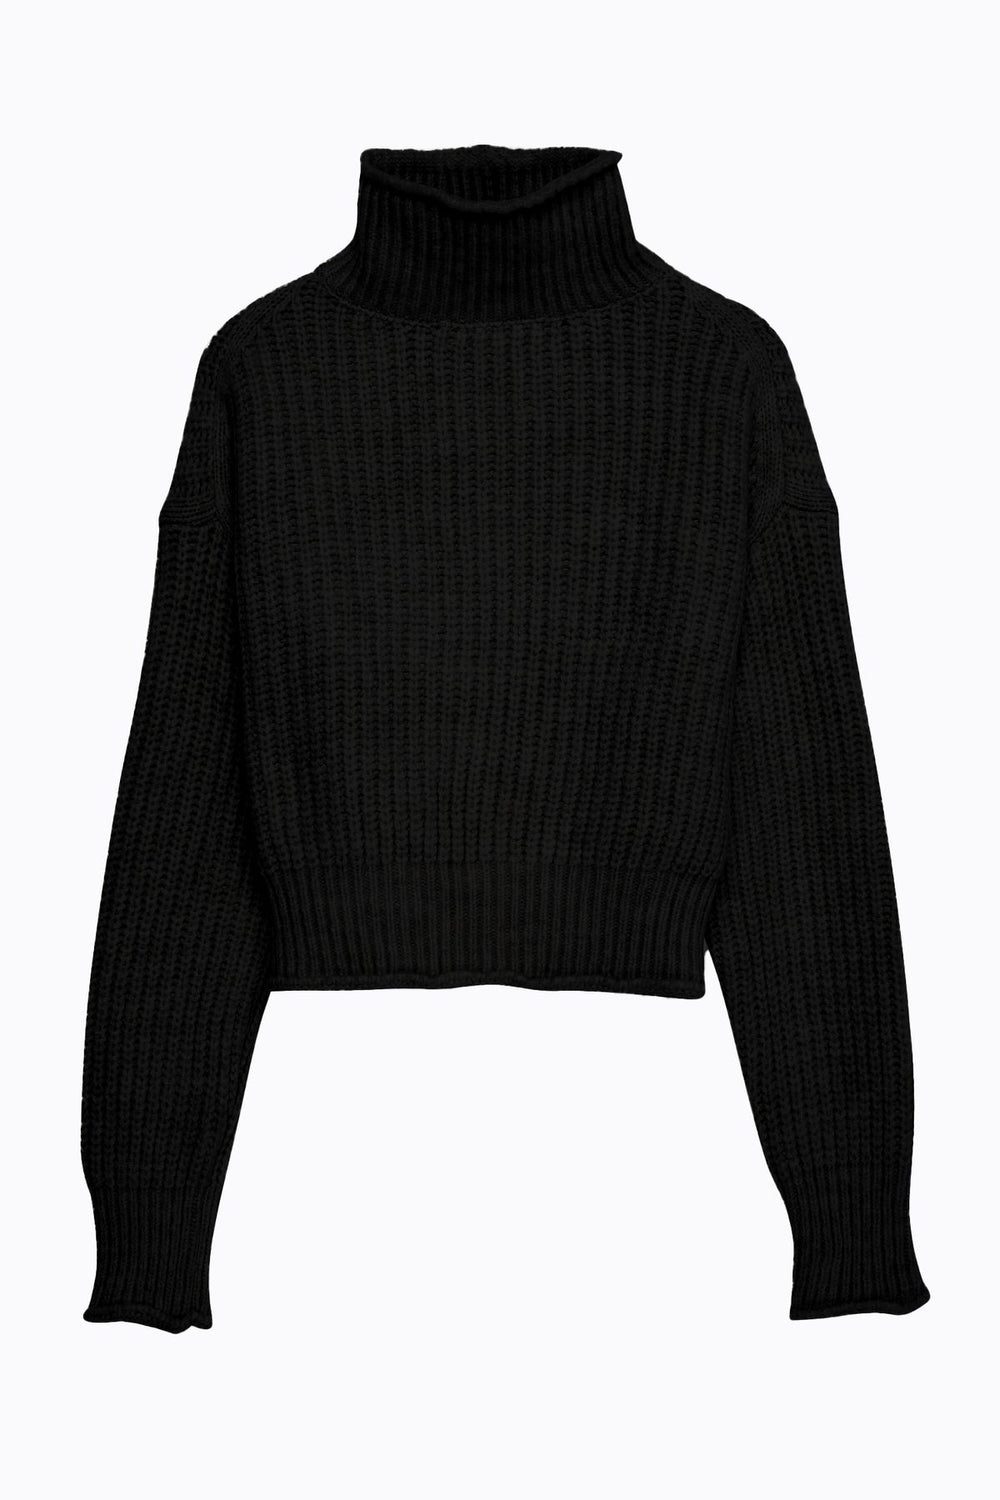 Knitted Detailed Thick Turtleneck Sweater Black